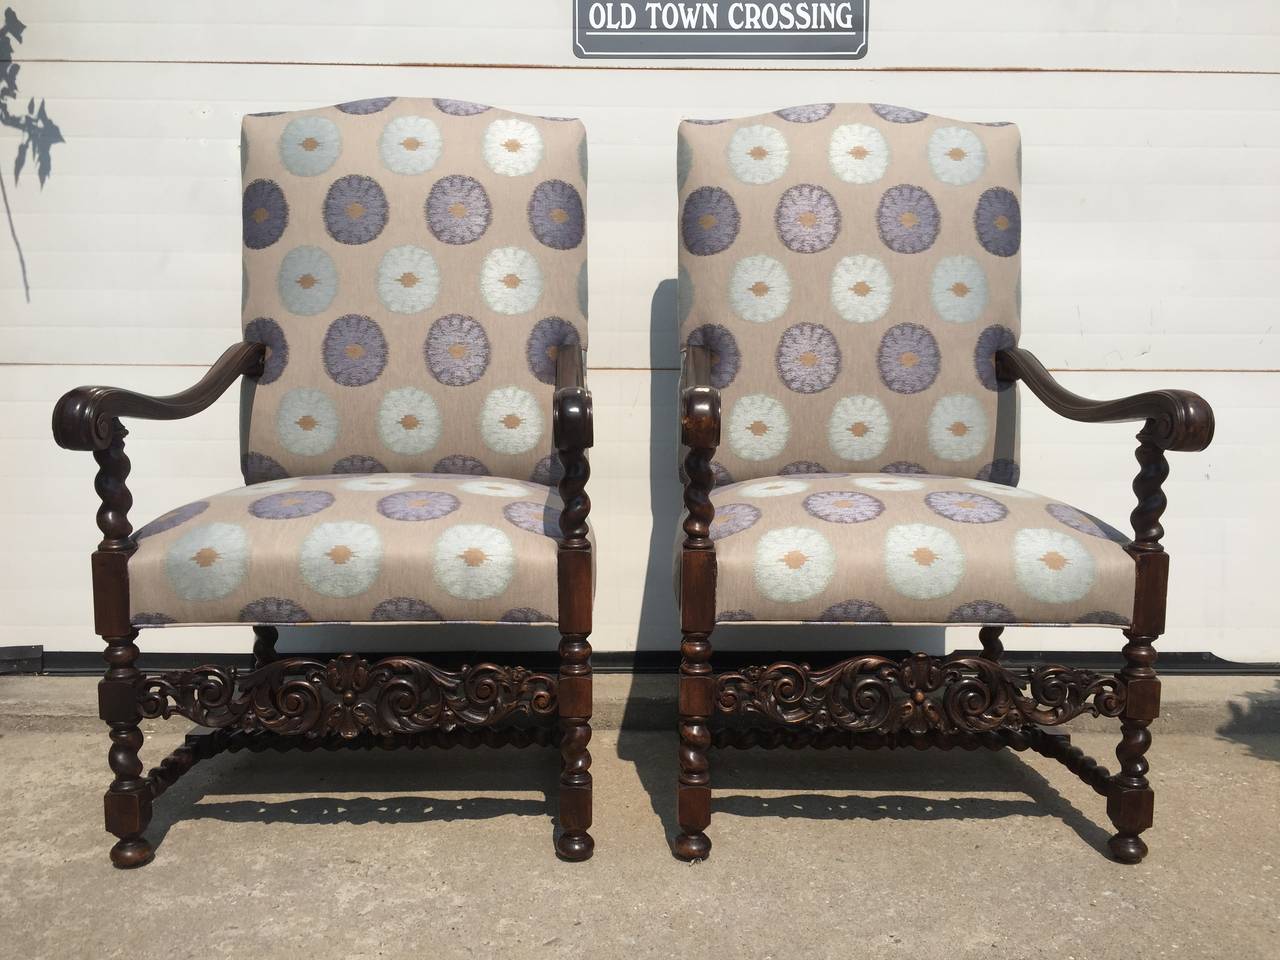 Chateau chairs in Mokum $230 a yard fabric. Chairs are French, 1880. All restored completely and these chairs are breathtaking. Please note the elegant carved front base, arms and support. The wood finish patina glows, it does not just shine, they